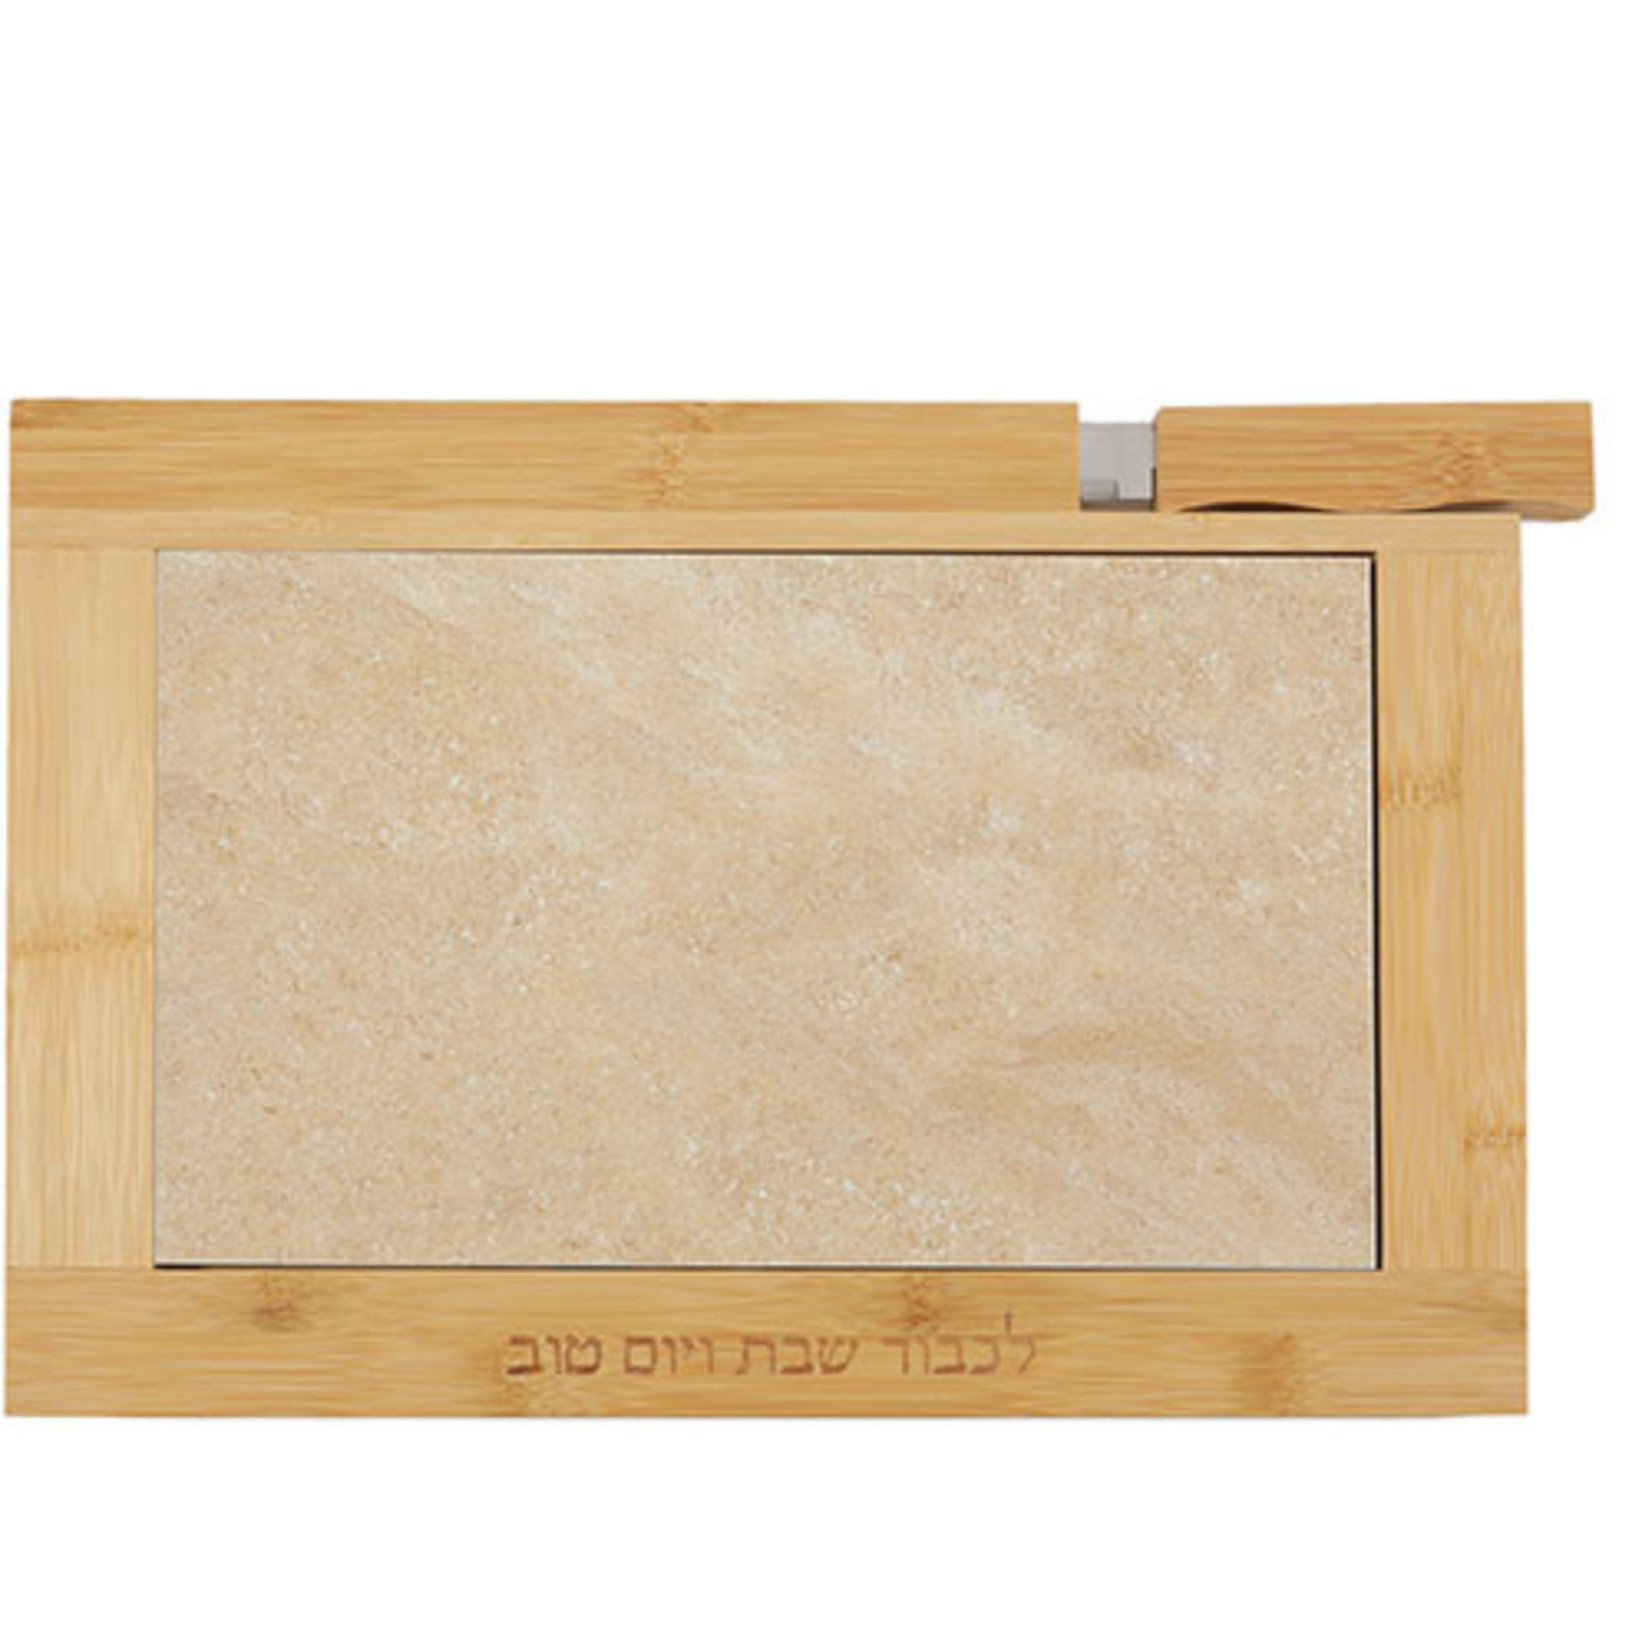 Challah Tray, Bamboo with Ceramic Tile